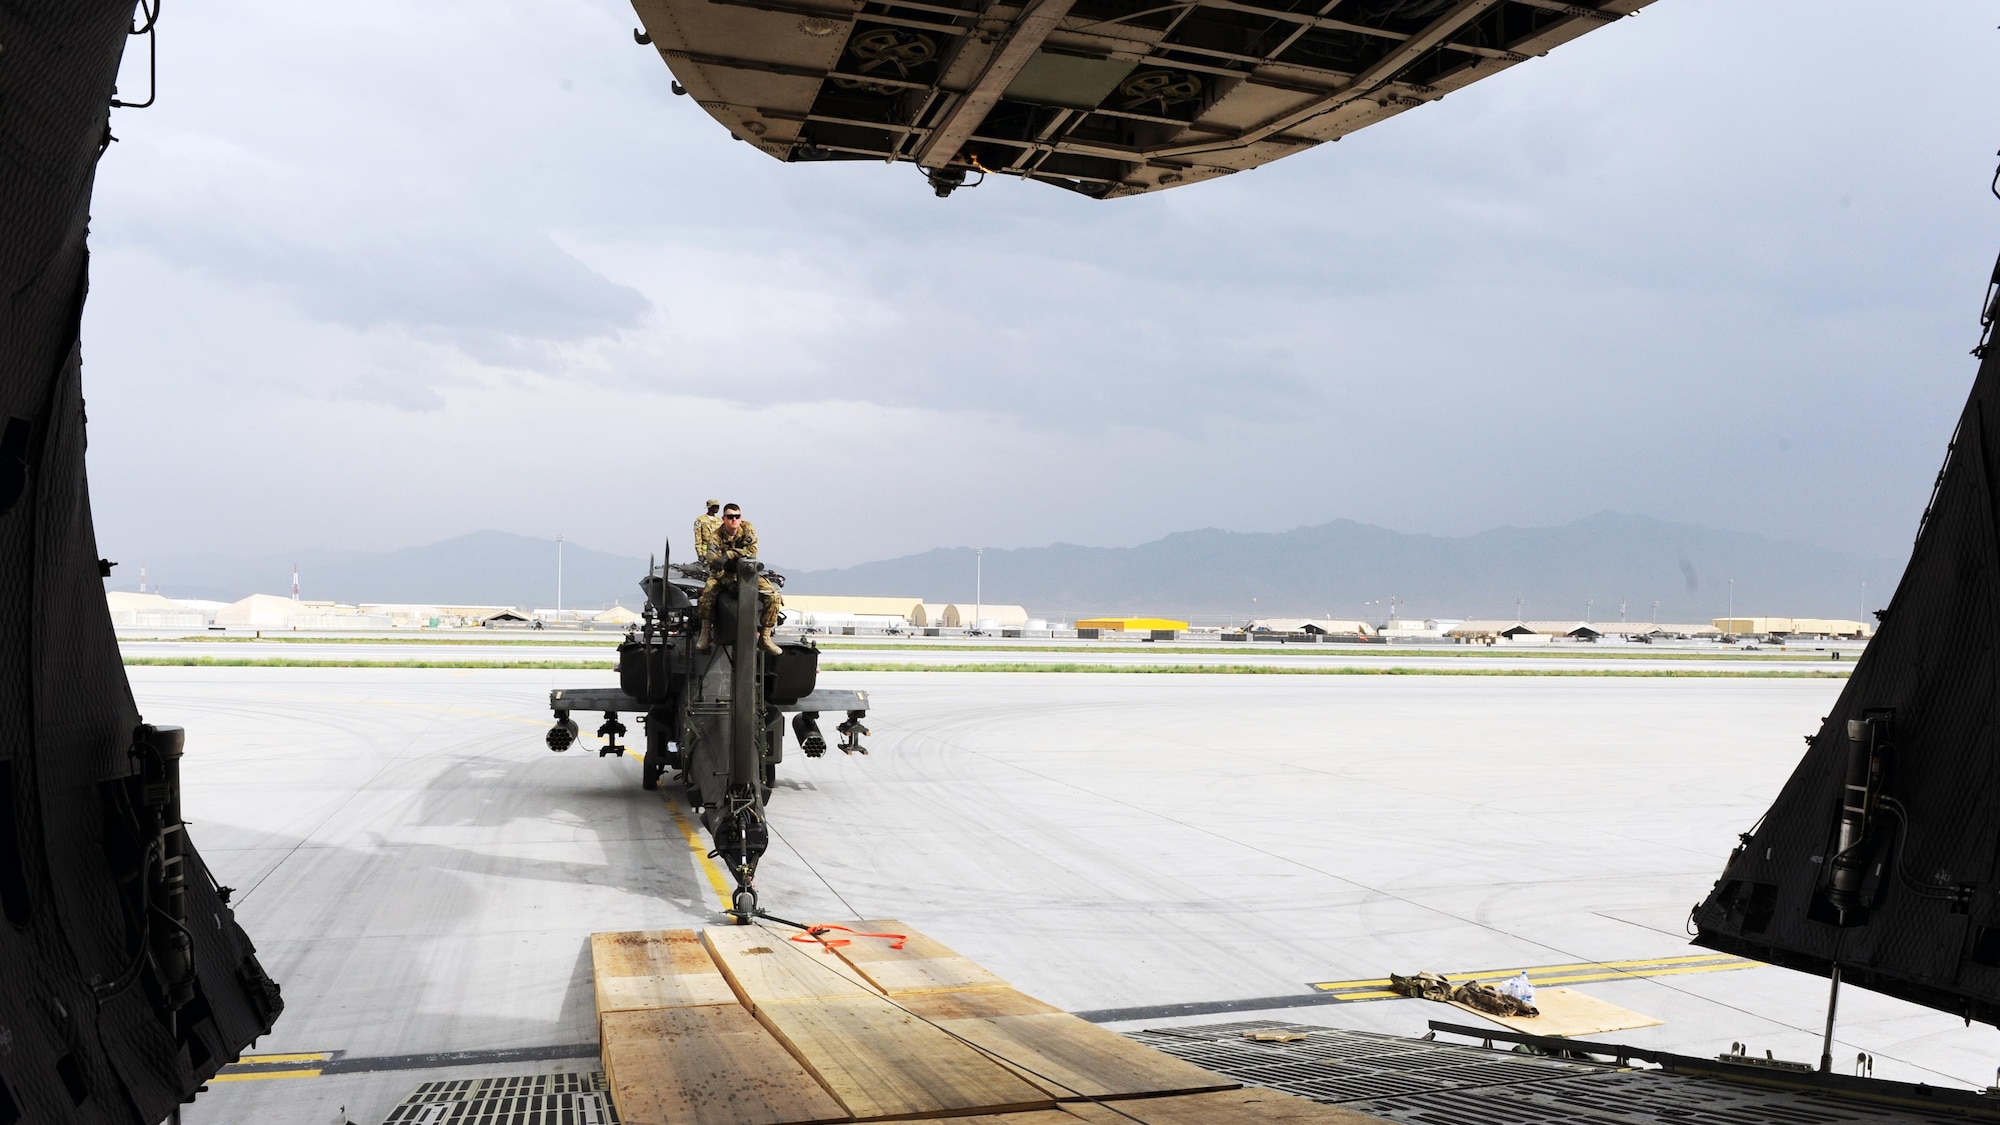 U.S. Soldiers assigned to the 96th Aviation Support Battalion, 101st Combat Aviation Brigade, act as spotters during the upload of a U.S. Army AH-64 Apache helicopter onto an Air Force C-5 Super Galaxy aircraft April 26, 2015 at Bagram Airfield, Afghanistan. Throughout April, several helicopters were uploaded and transported to the United States to facilitate the swap out of the Army’s 82nd and 101st Combat Aviation Brigades. (U.S. Air Force photo by Staff Sgt. Whitney Amstutz/Released)